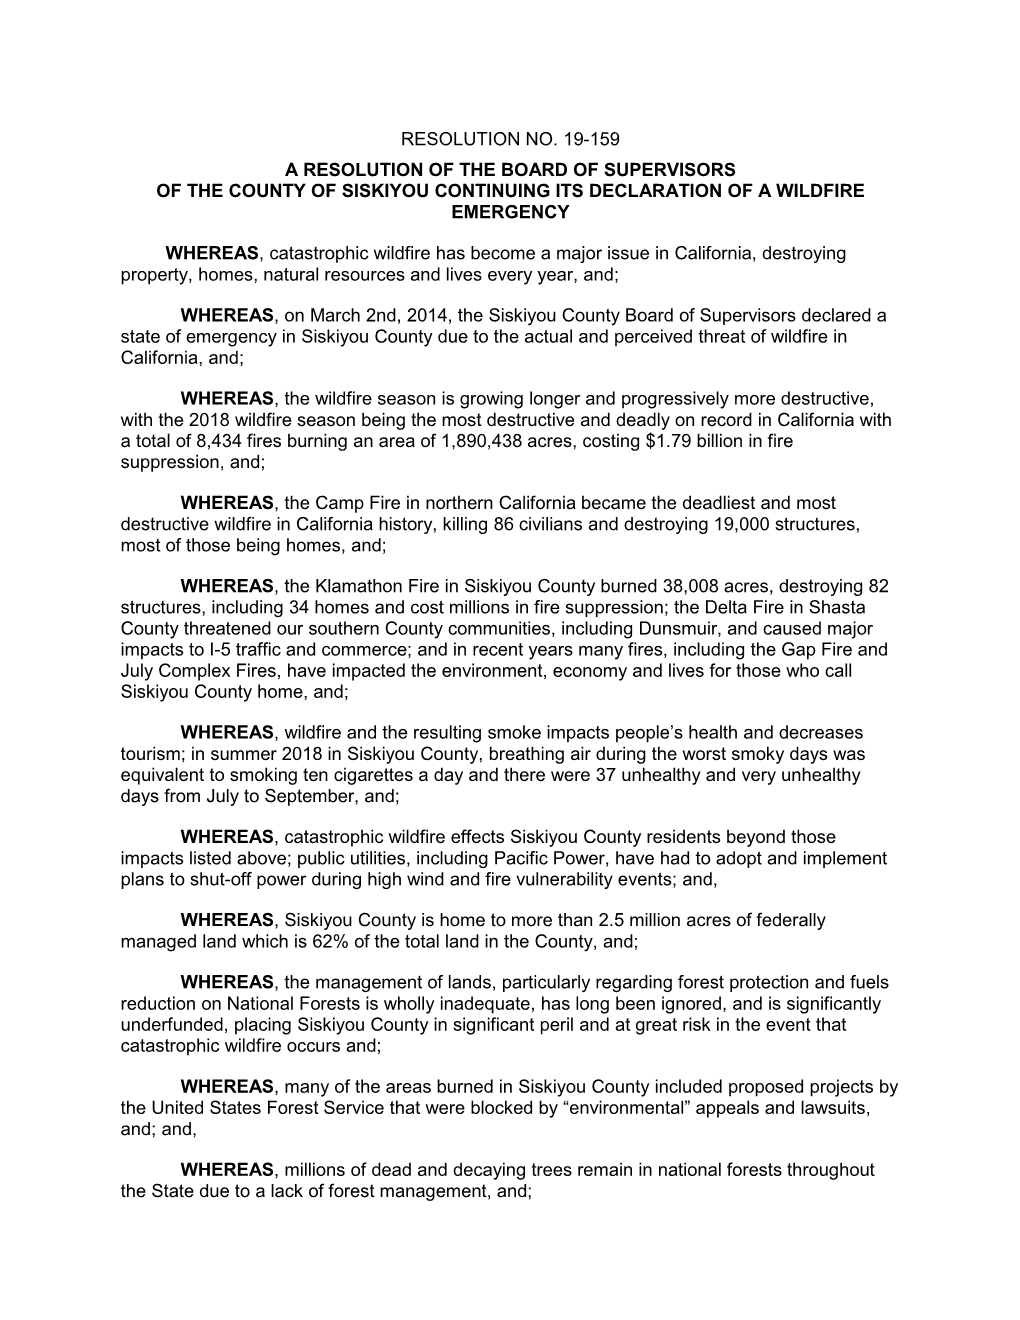 Resolution No. 19-159 a Resolution of the Board of Supervisors of the County of Siskiyou Continuing Its Declaration of a Wildfire Emergency